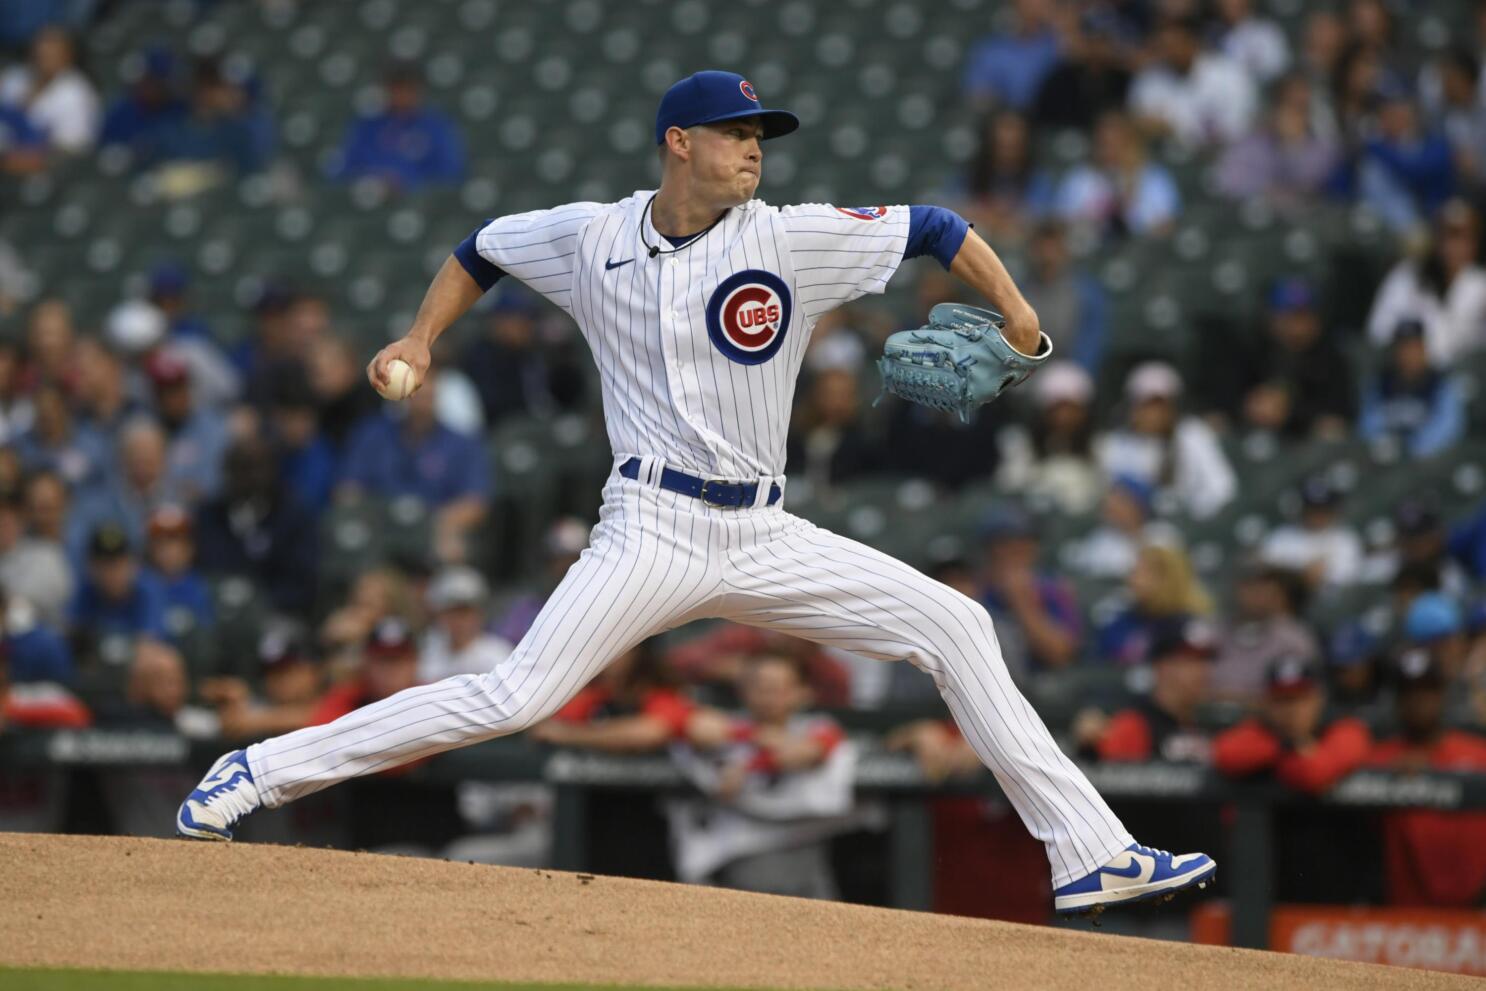 MLB Field of Dreams Game final score, results: Cubs' pitching